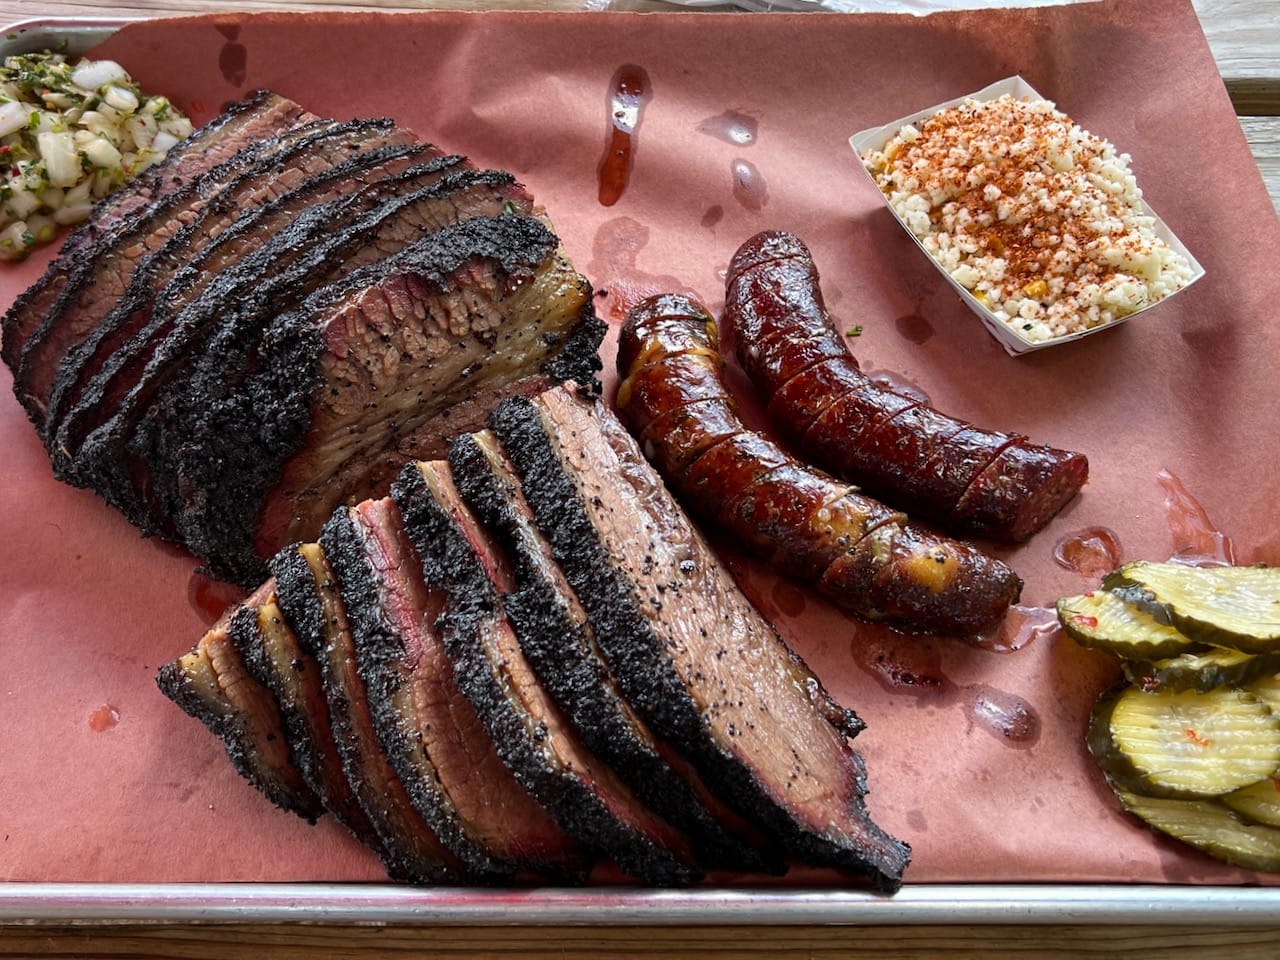 Smoked brisket, sausage, Mexican street corn, pickles, and onions at 2M Smokehouse in San Antonio, Tx.